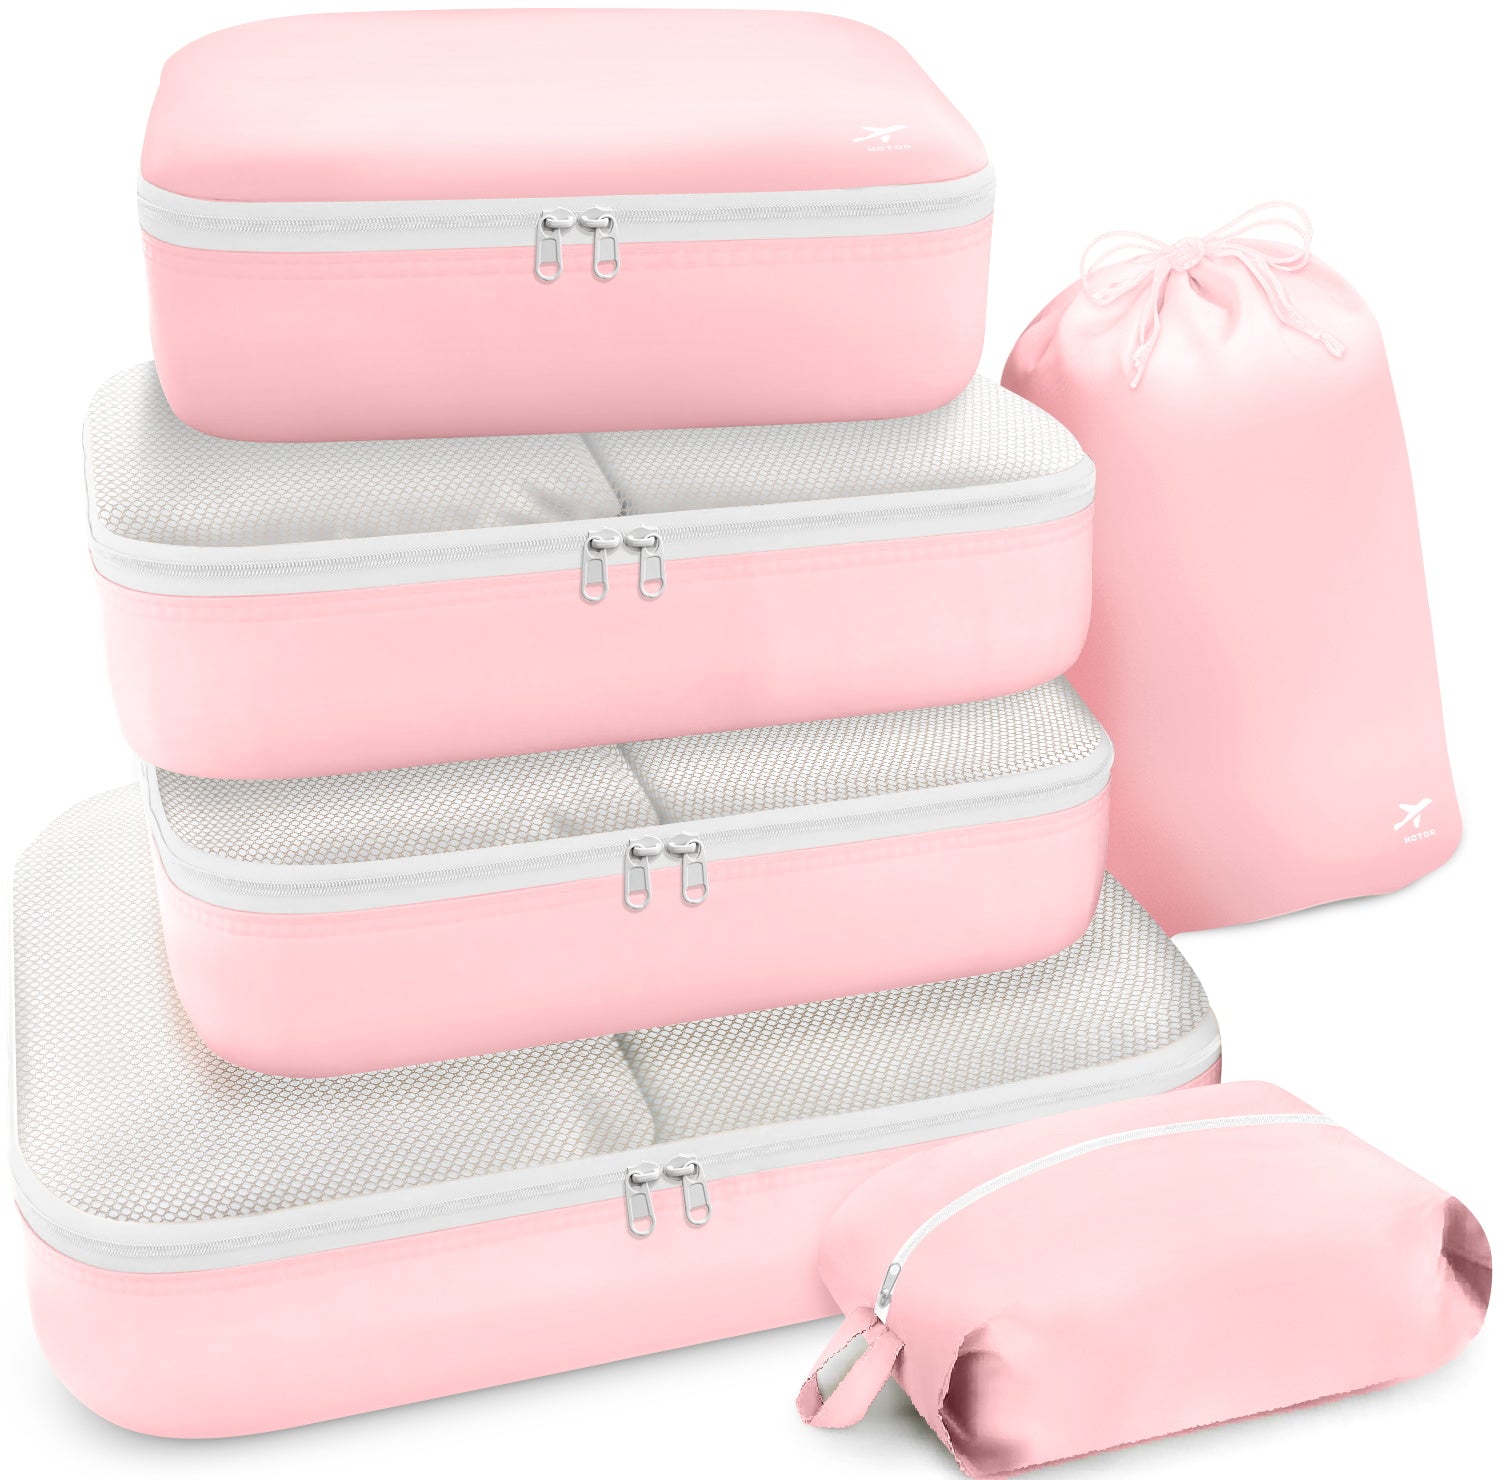 HOTOR Packing Cubes for Suitcases - 6 Pieces, Light Packing Cubes for Travel, Premium Suitcase Organizer Bags Set, Space-Saving Luggage Organizers for Suitcase, Water-Resistant Travel Essentials, Pink